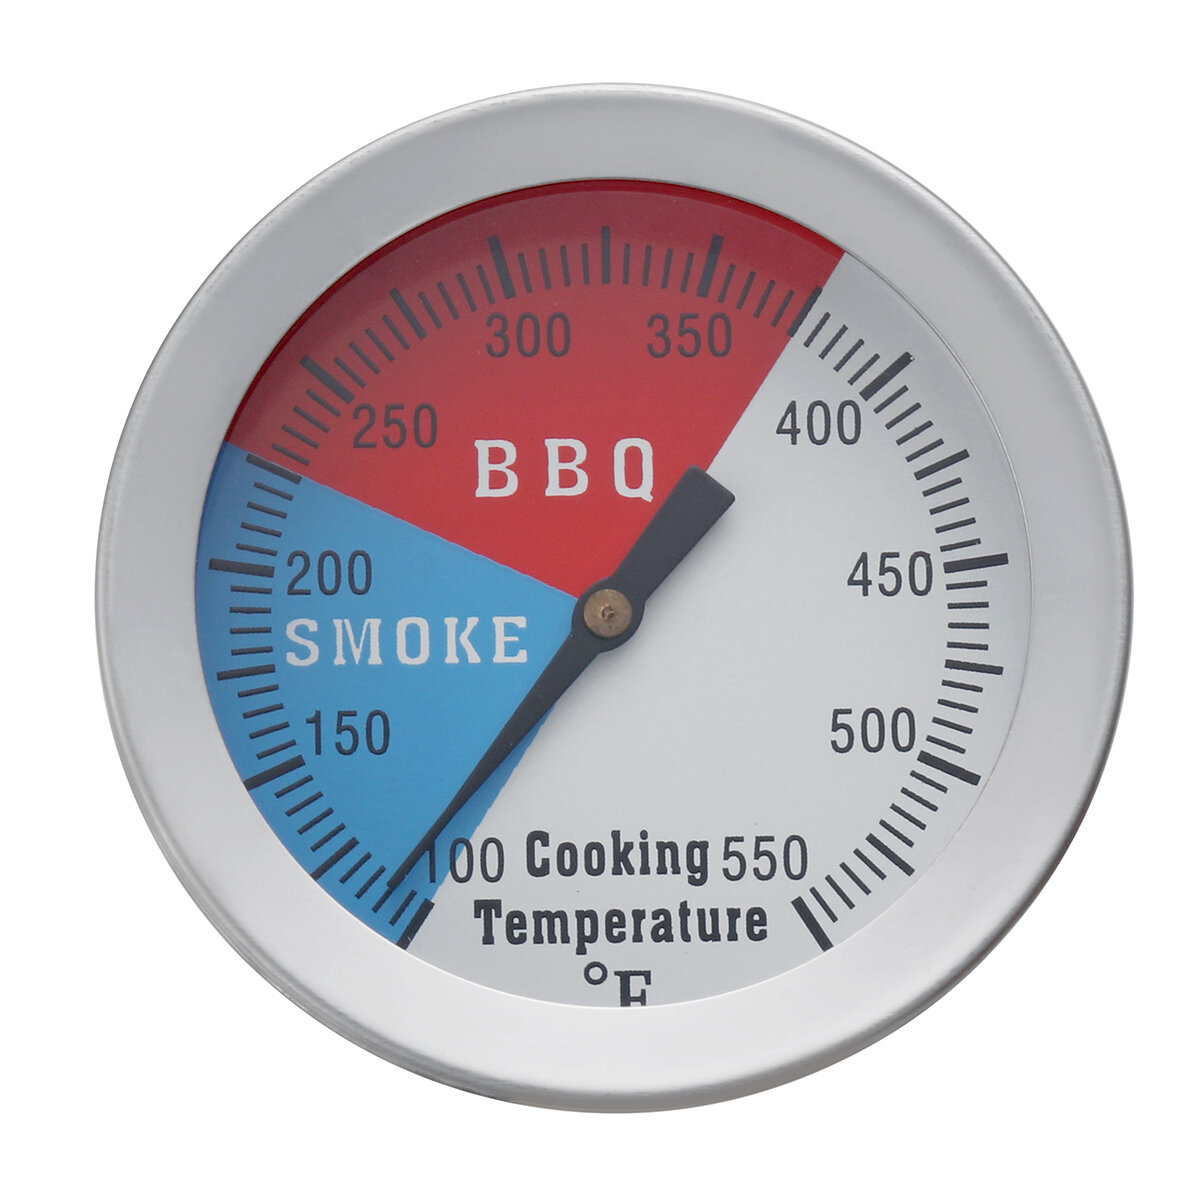 100-550  Temperatuur-thermometer Gauge Barbecue BBQ Grill Rookoven Pit Thermostaat